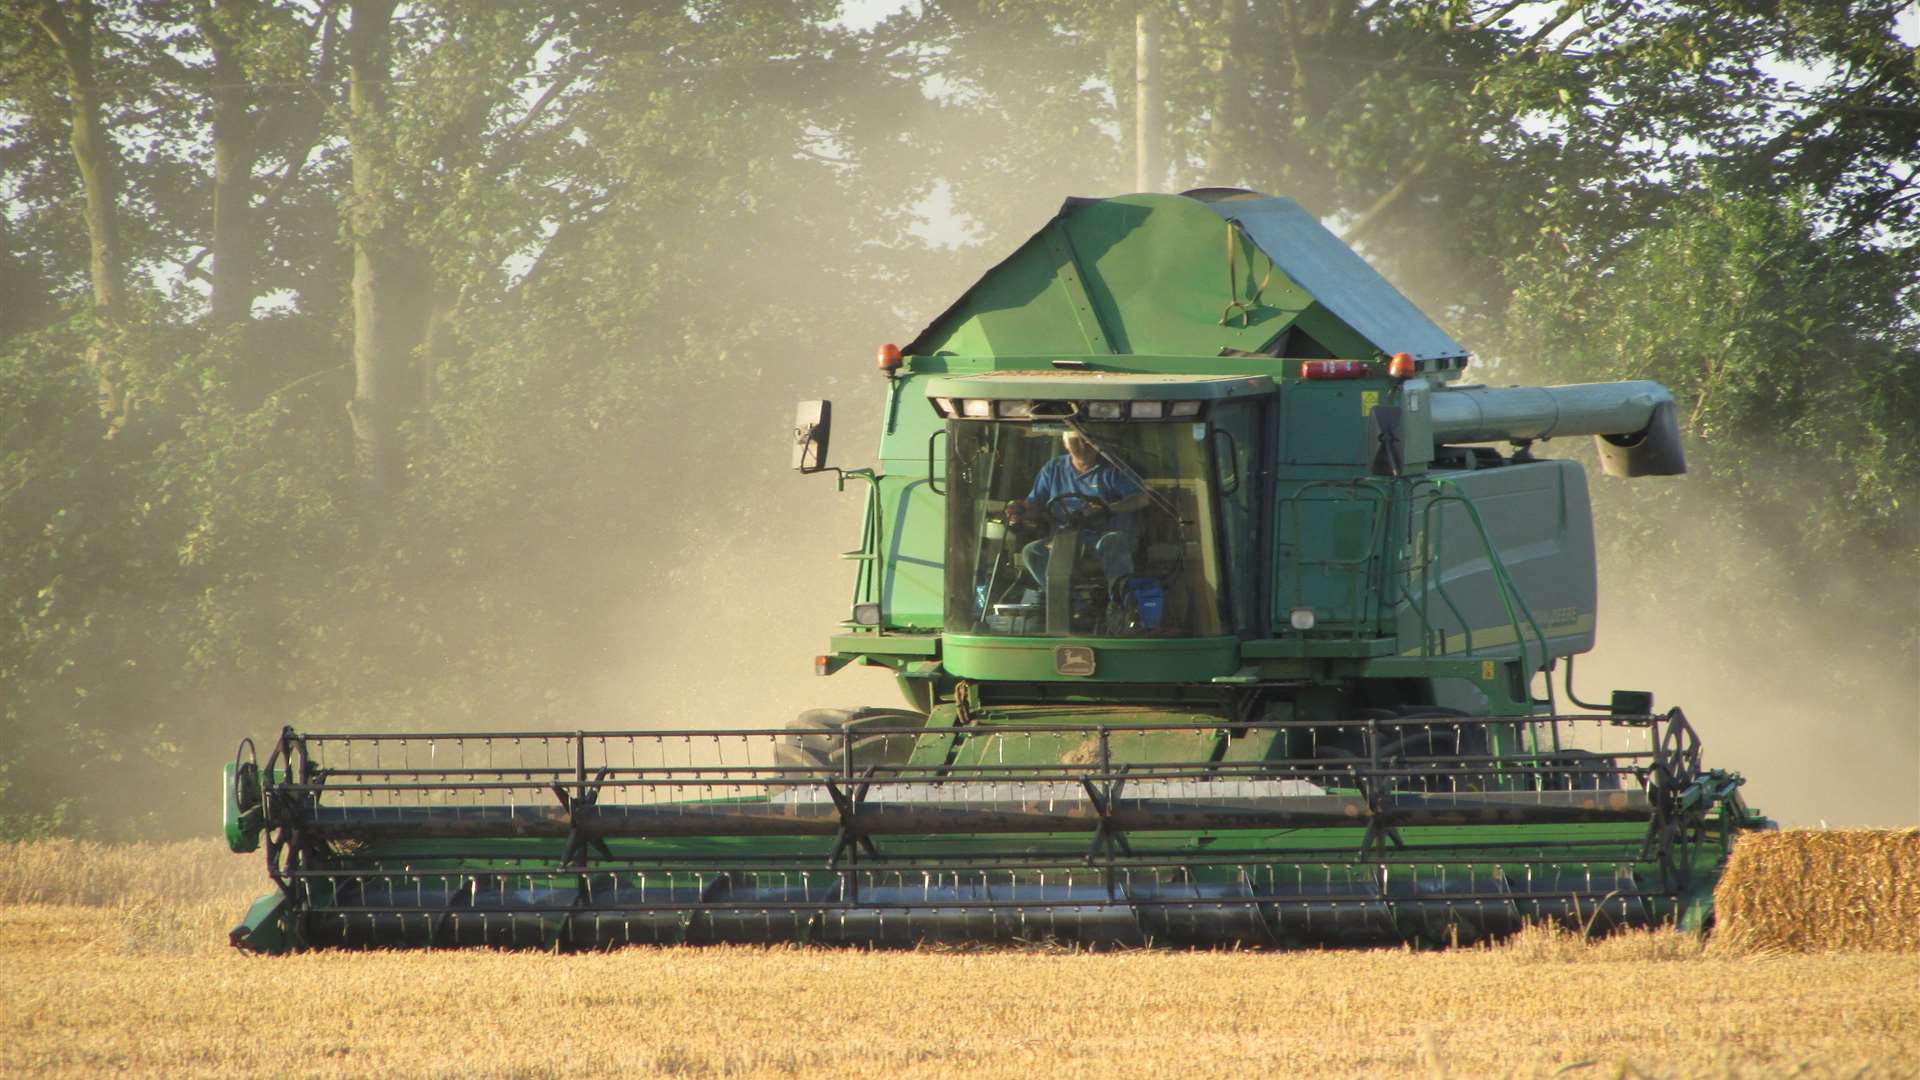 A combine harvester at work. Picture by Roger Sills.